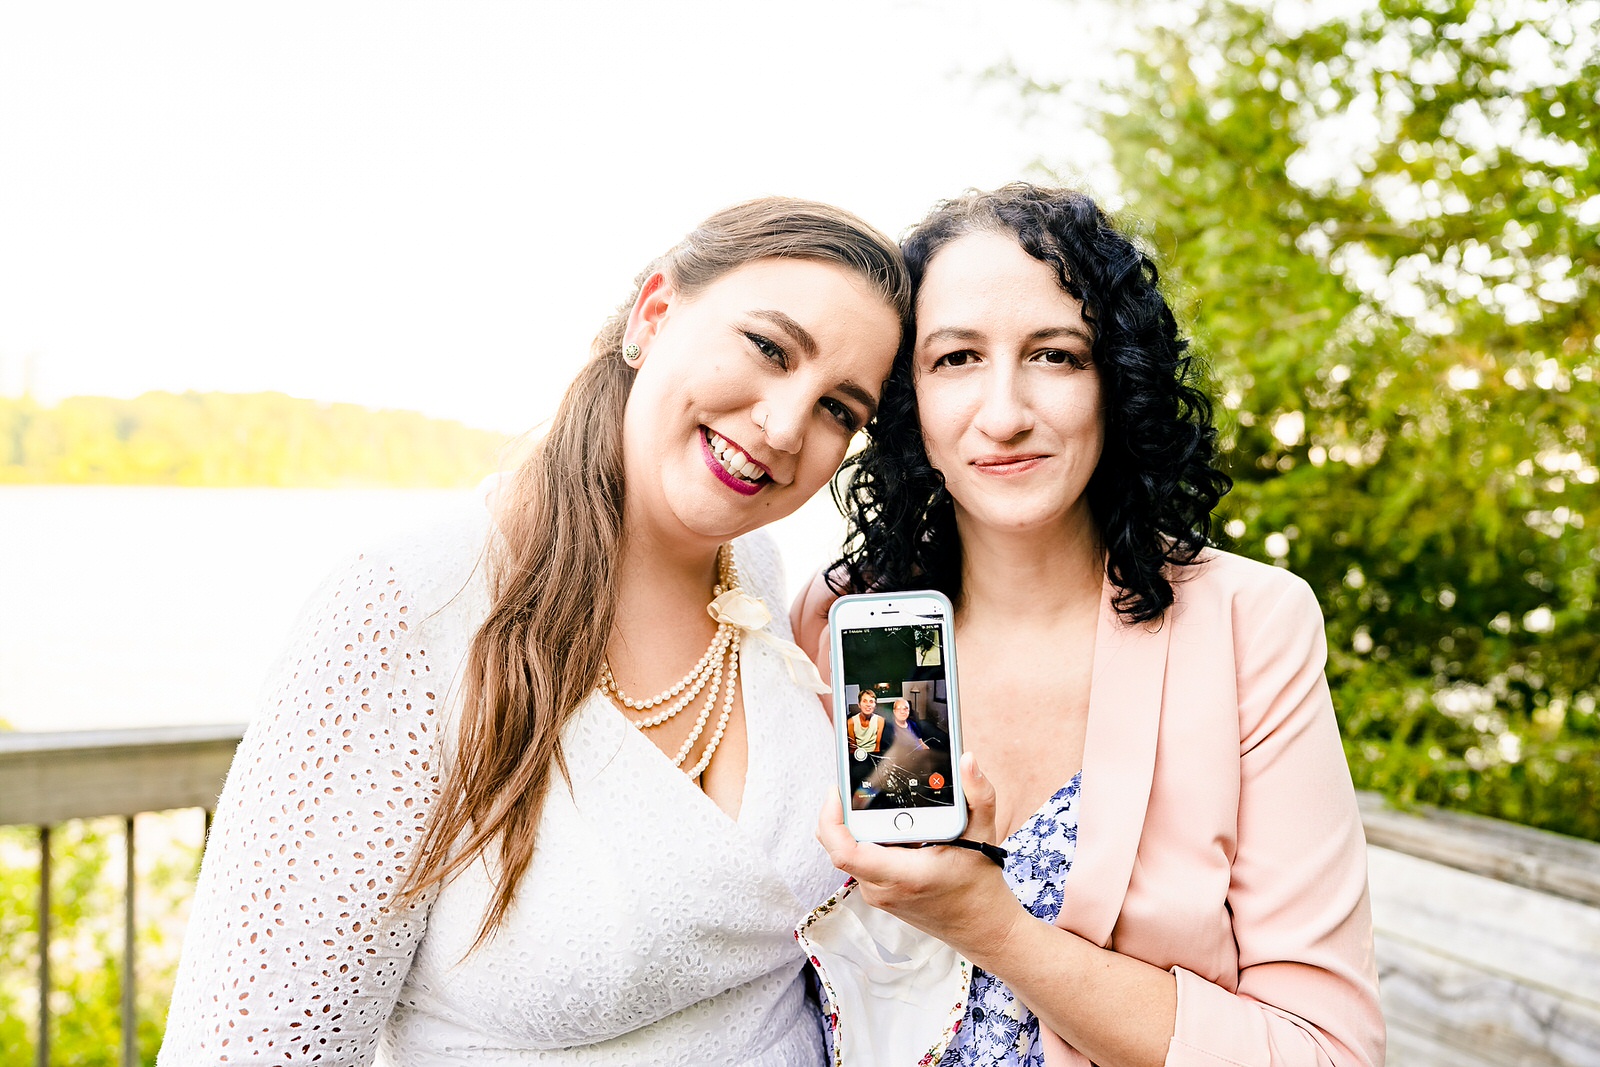 Two brides pose with one bride's parents who have facetimed in to the wedding ceremony